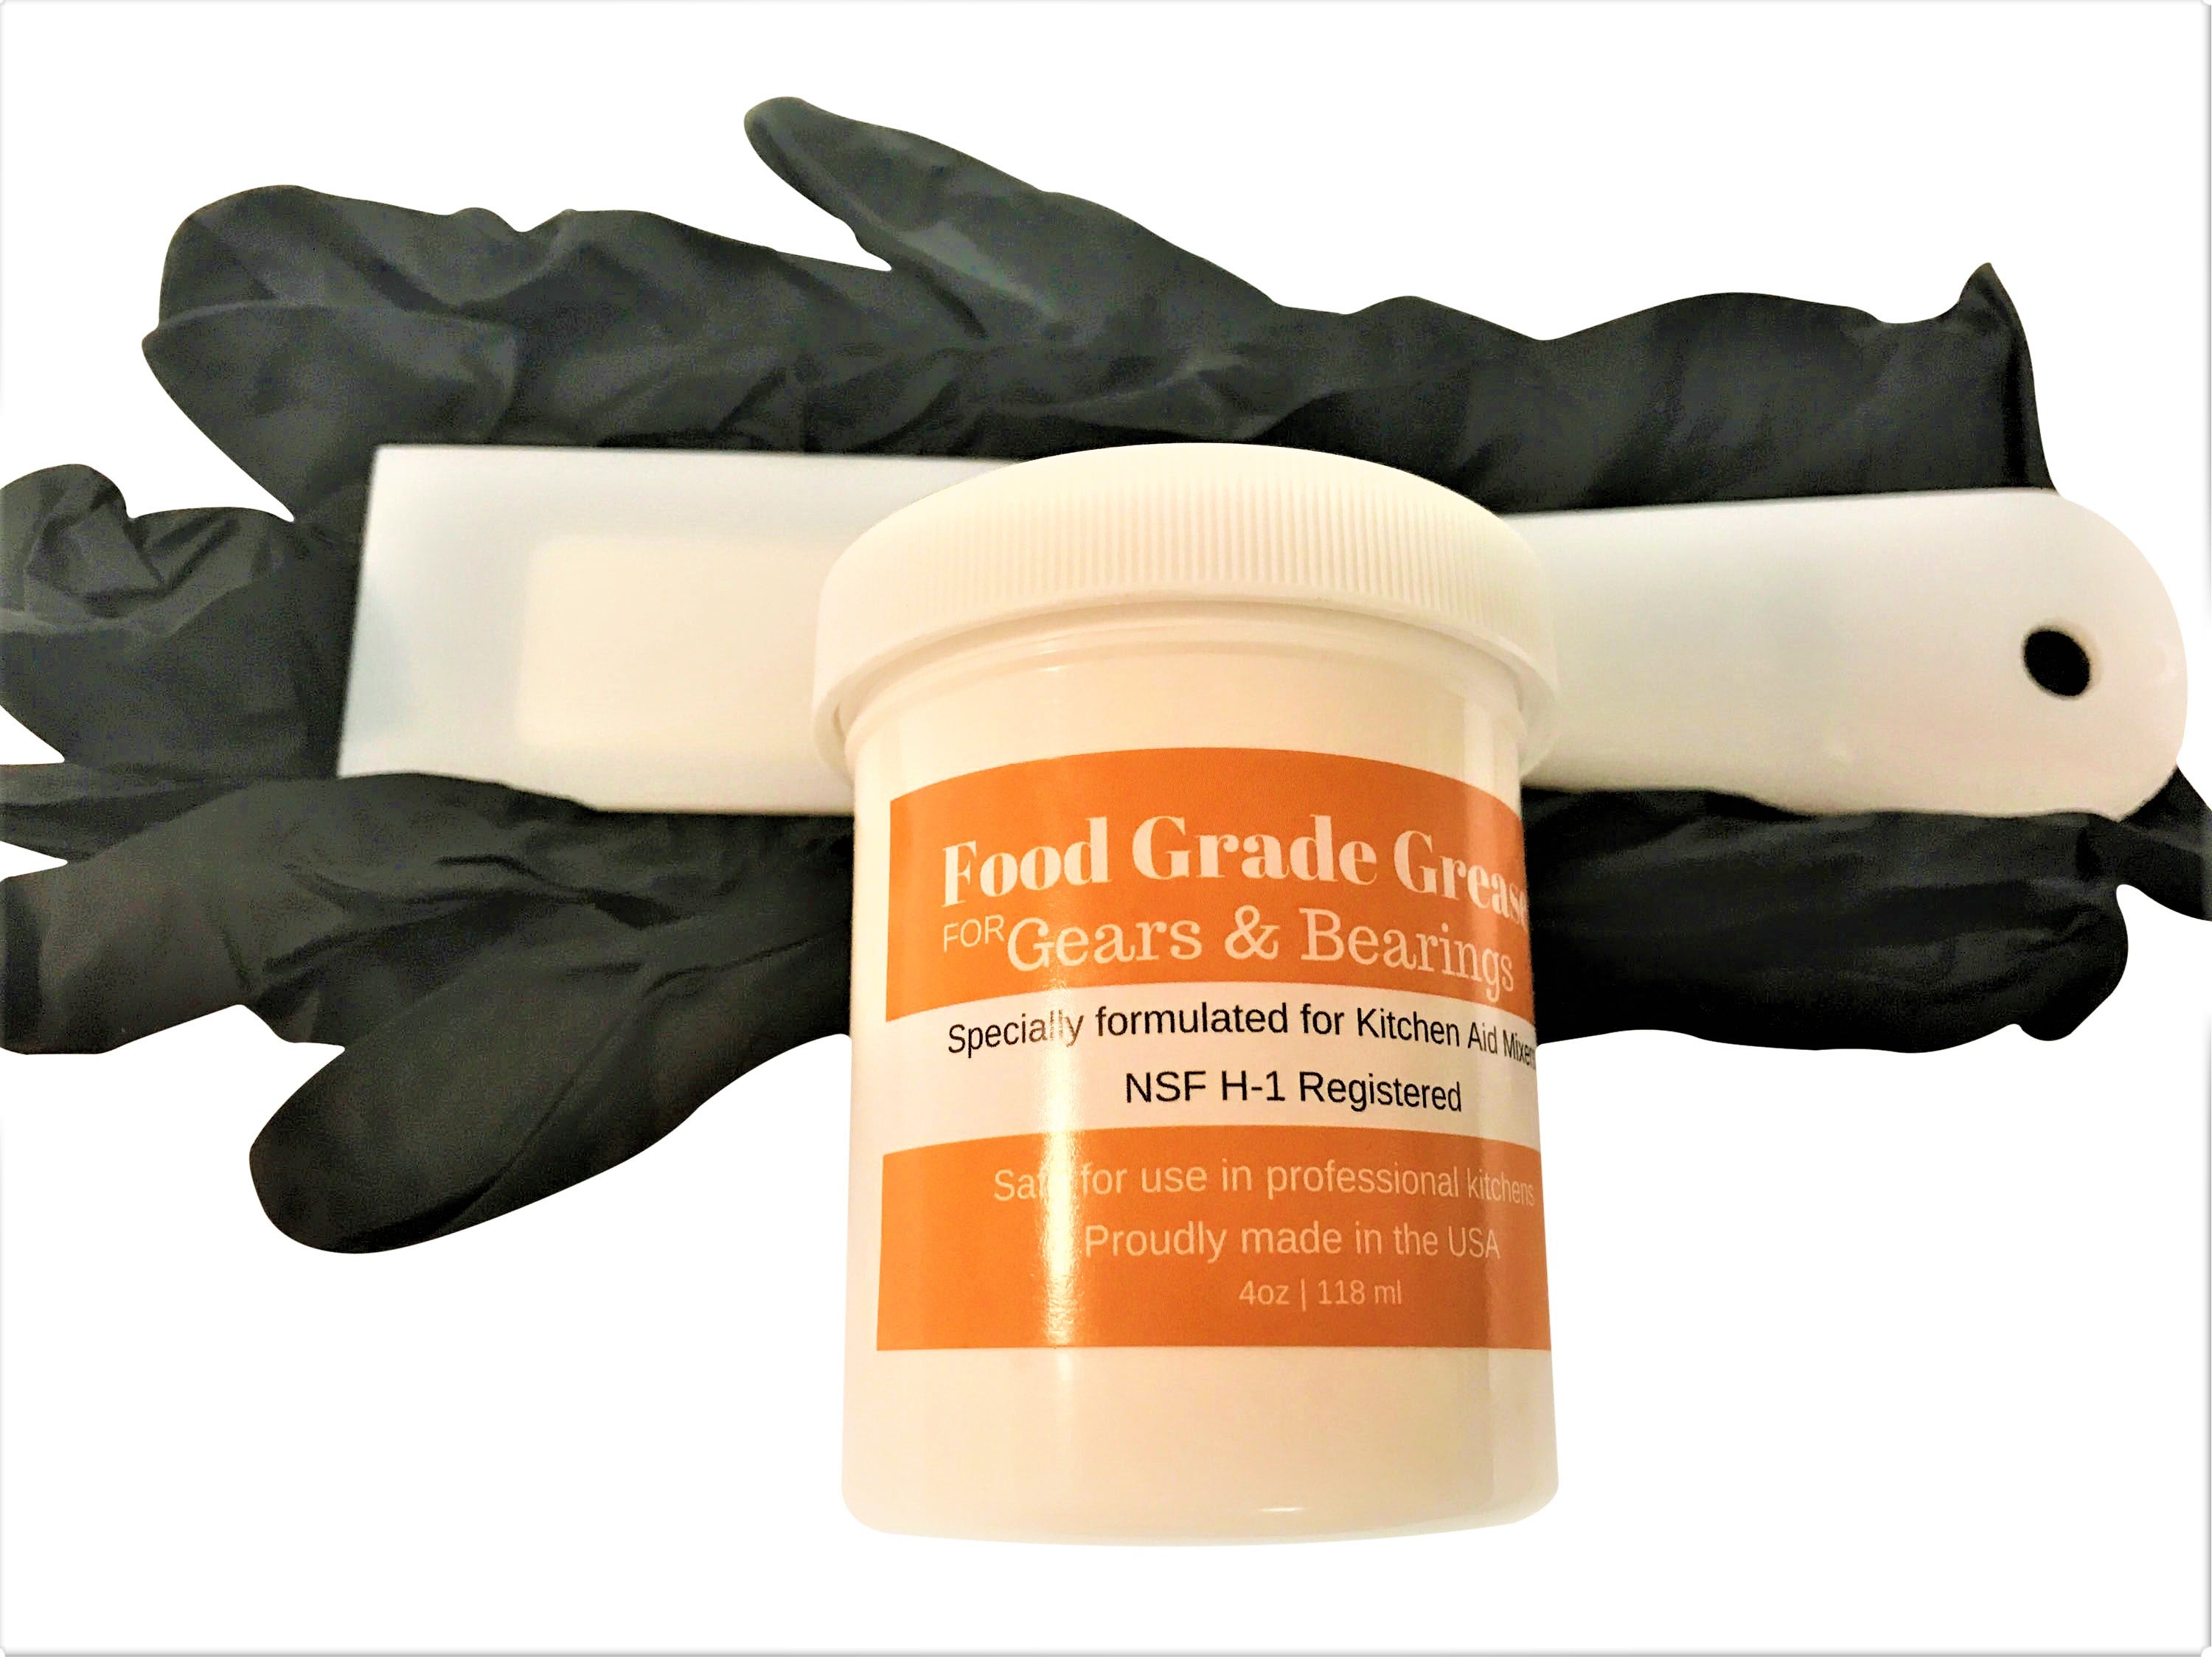 4 Oz Food Grade Grease for Kitchen Aid Stand Mixer 